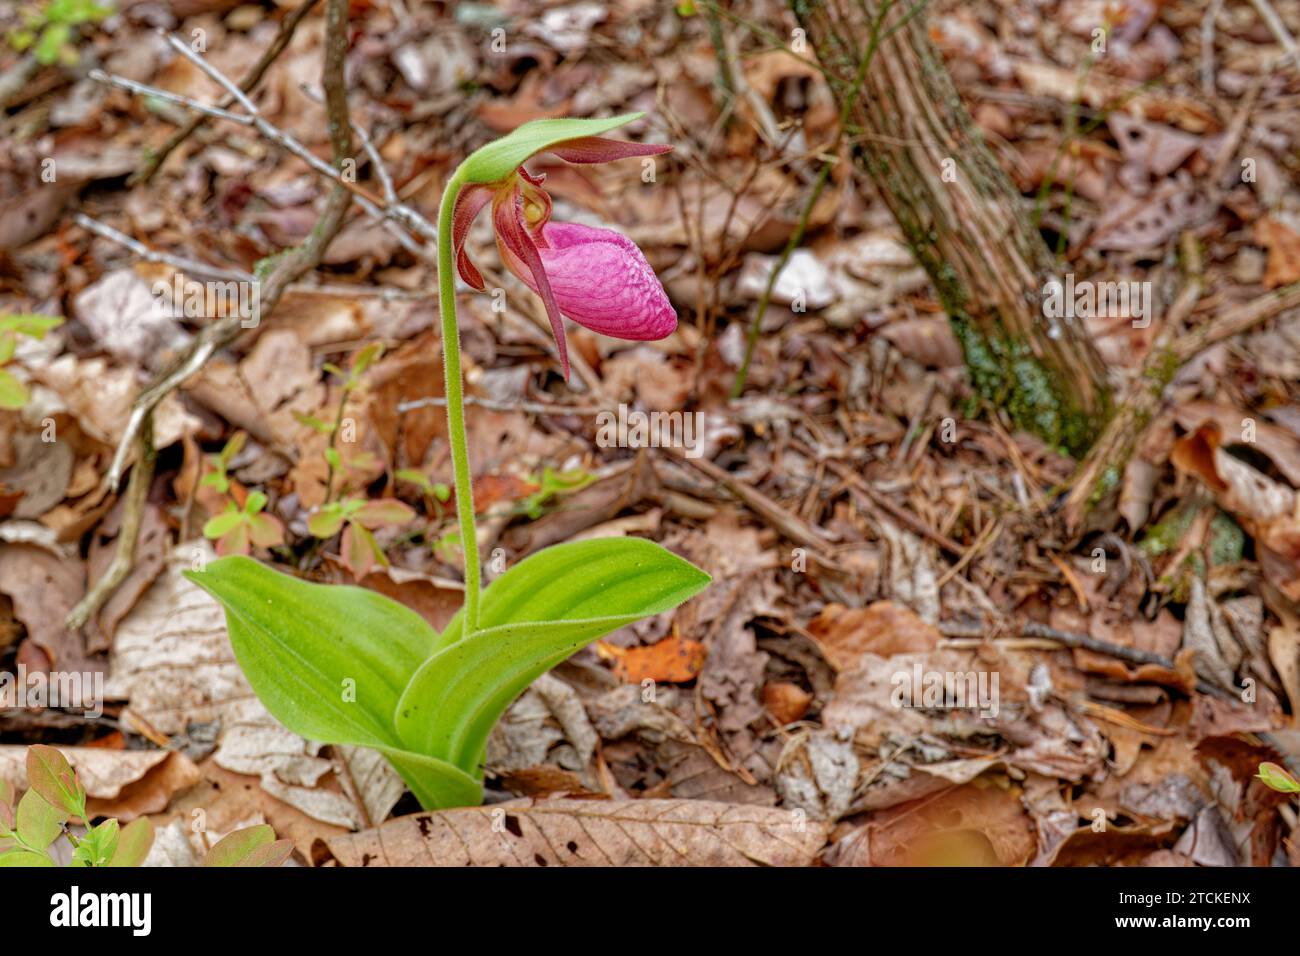 Bright pink with foliage lady's slipper plant in full bloom emerged from the forest ground surrounded by fallen leaves and twigs in the forest in earl Stock Photo